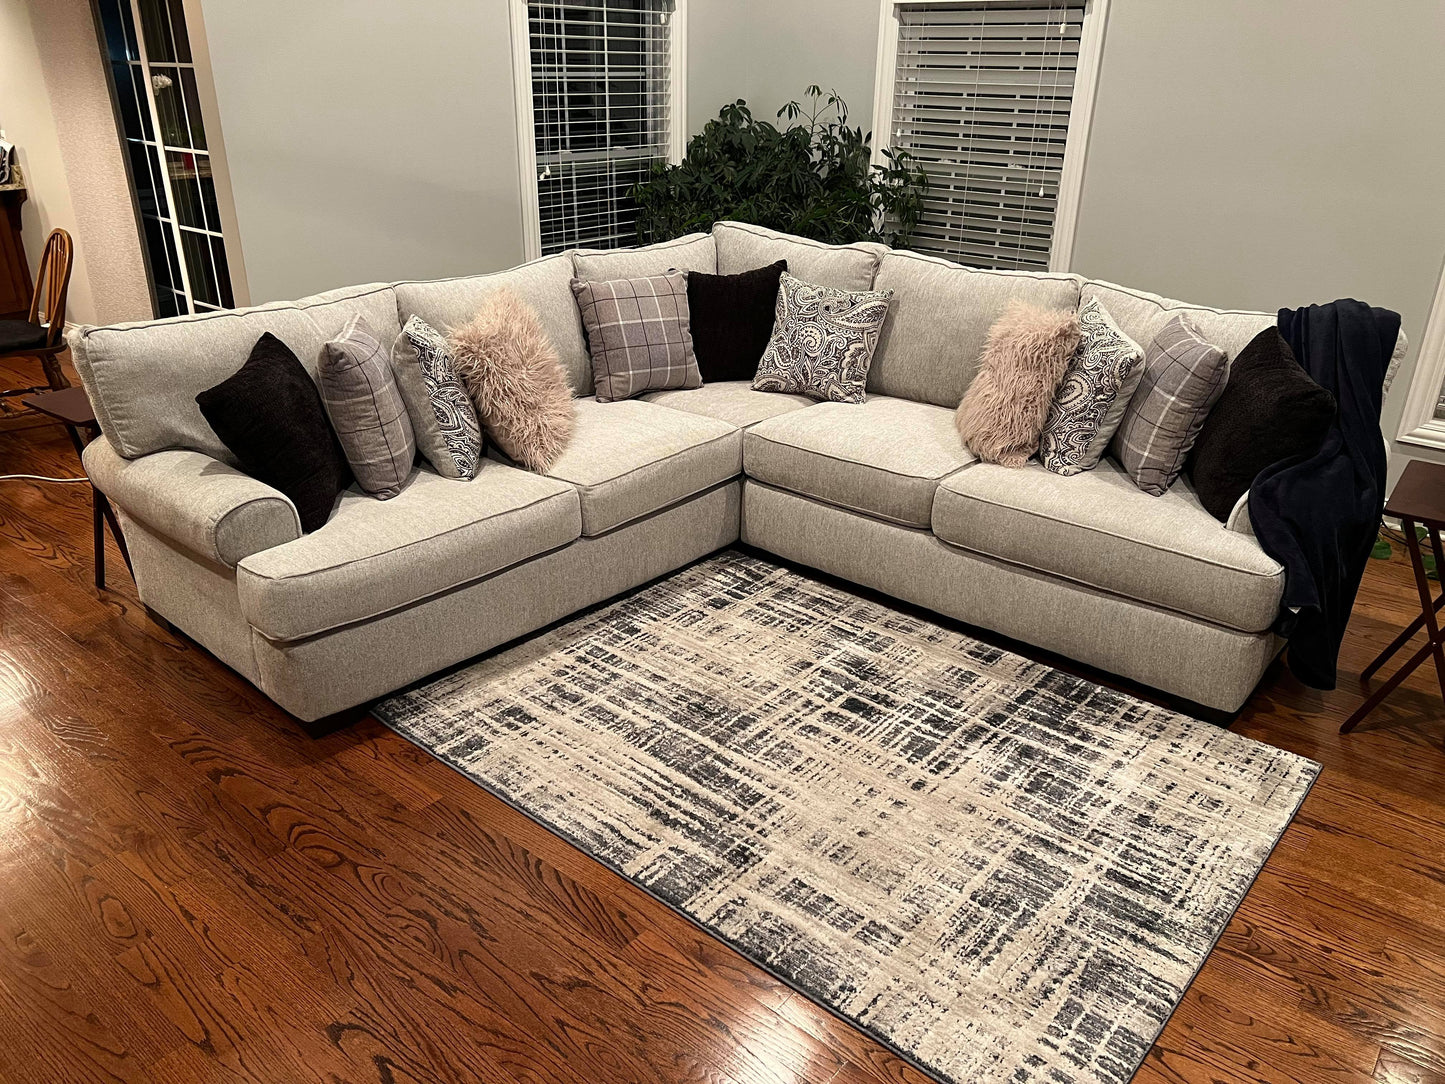 WEEKLY or MONTHLY. Stunning Griffith Sectional